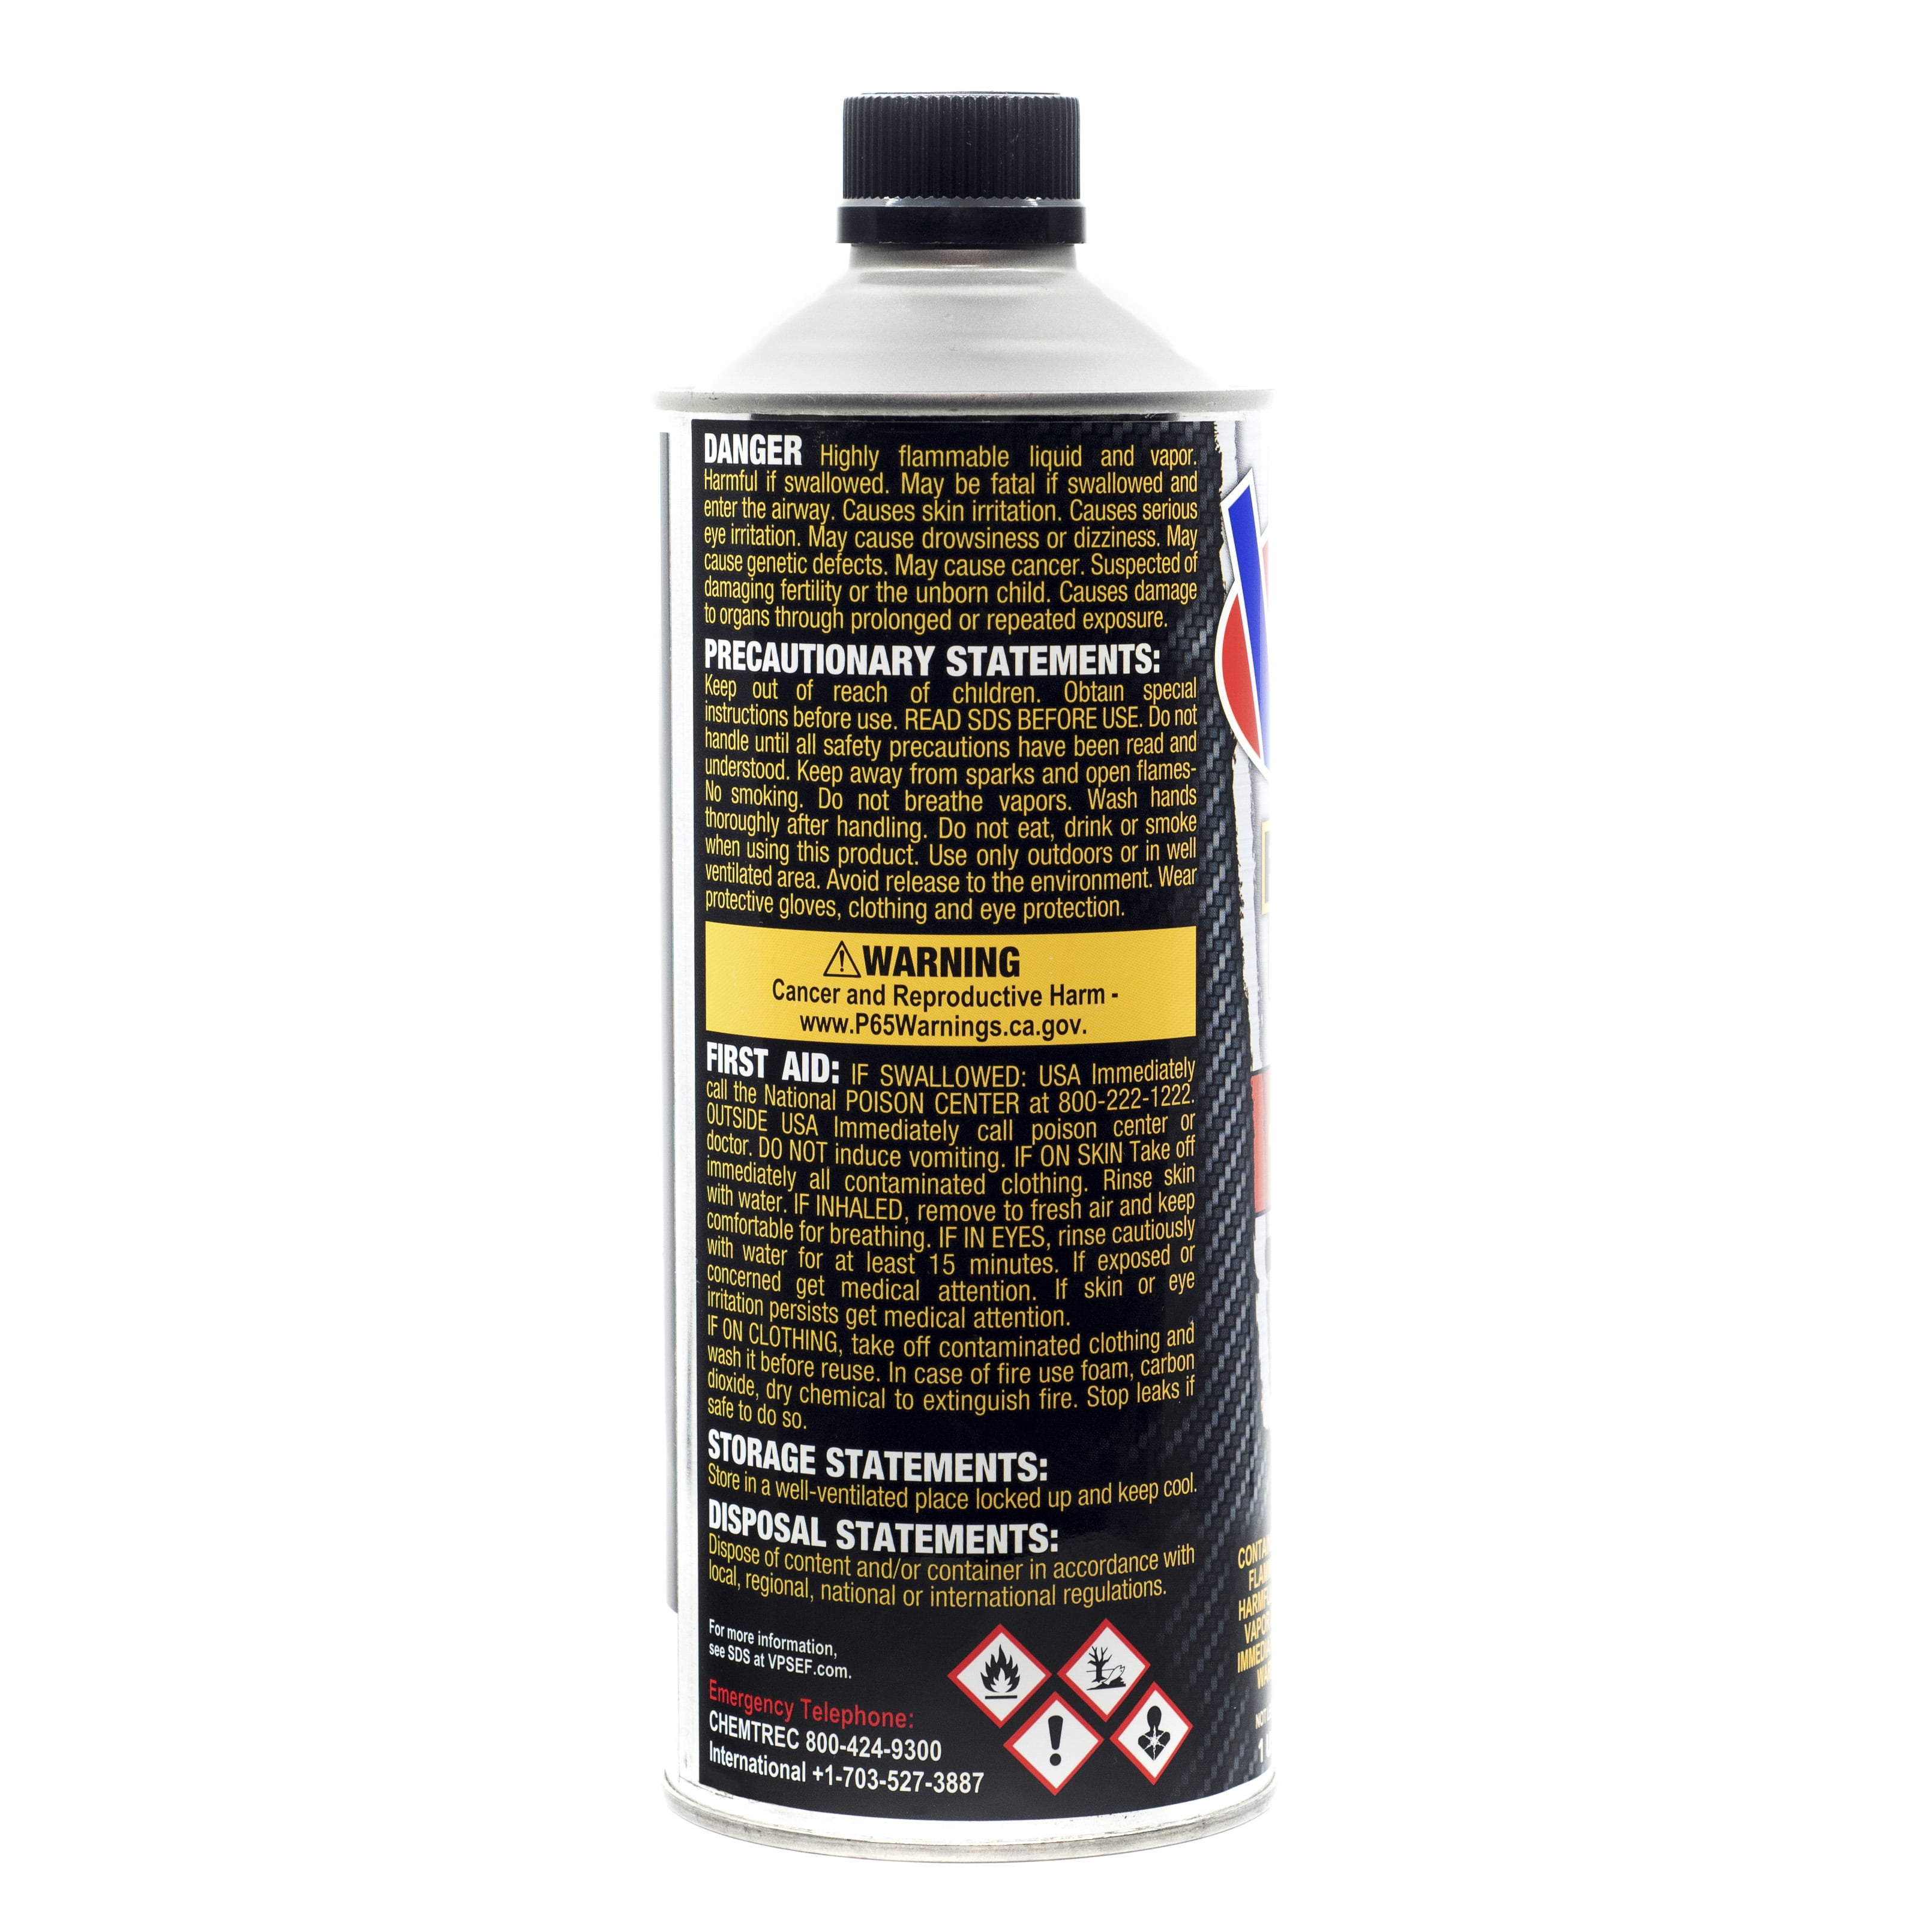 VP Small Engine Fuels 32 Oz. Fix-It Fuel System Cleaner with Mechanic In-a- Bottle - Power Townsend Company